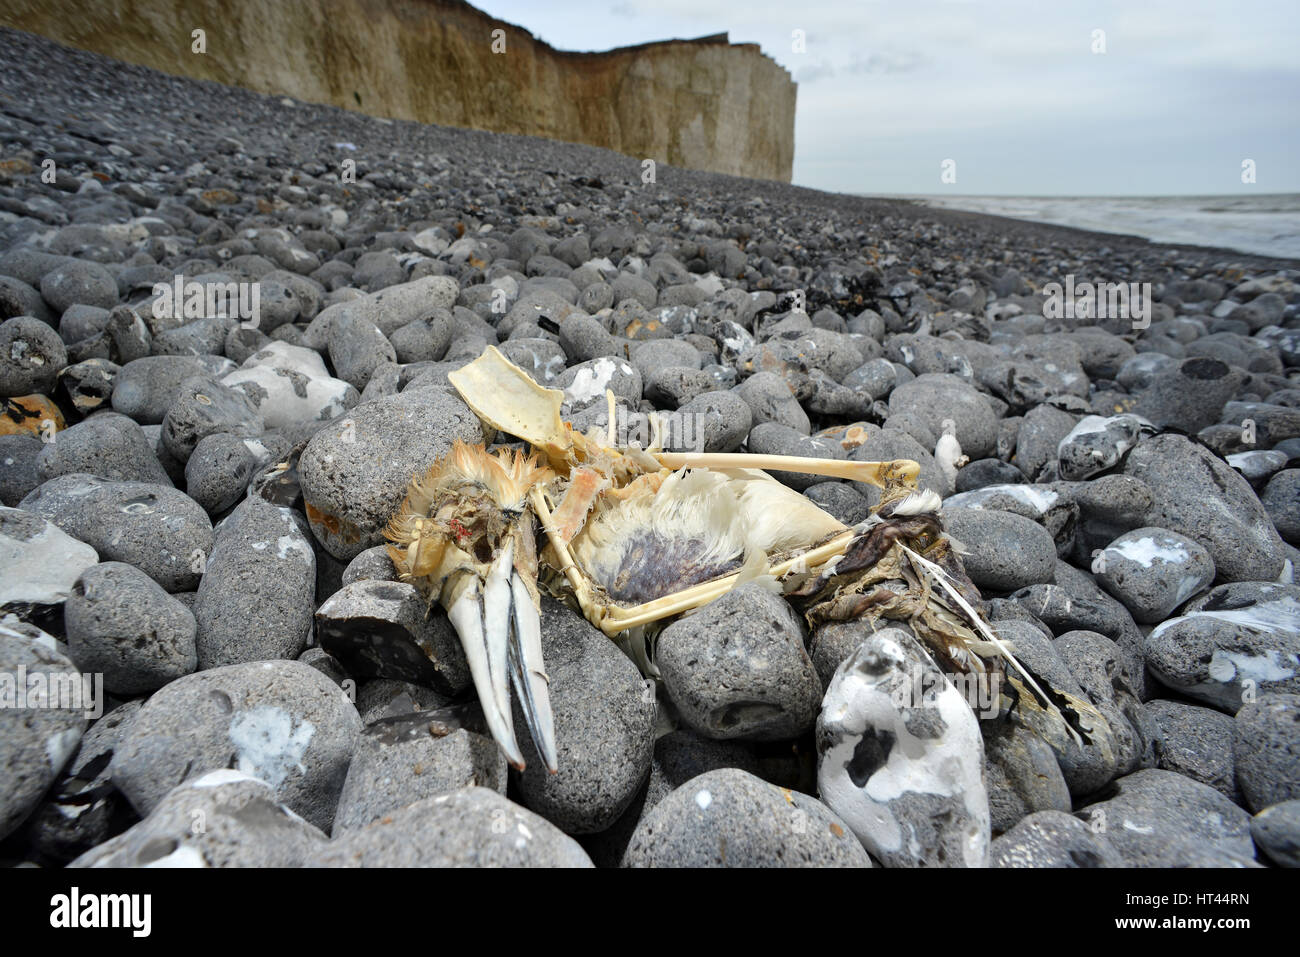 Dead gannet, sea bird, washed up on a pebble beach in Sussex, UK Stock Photo